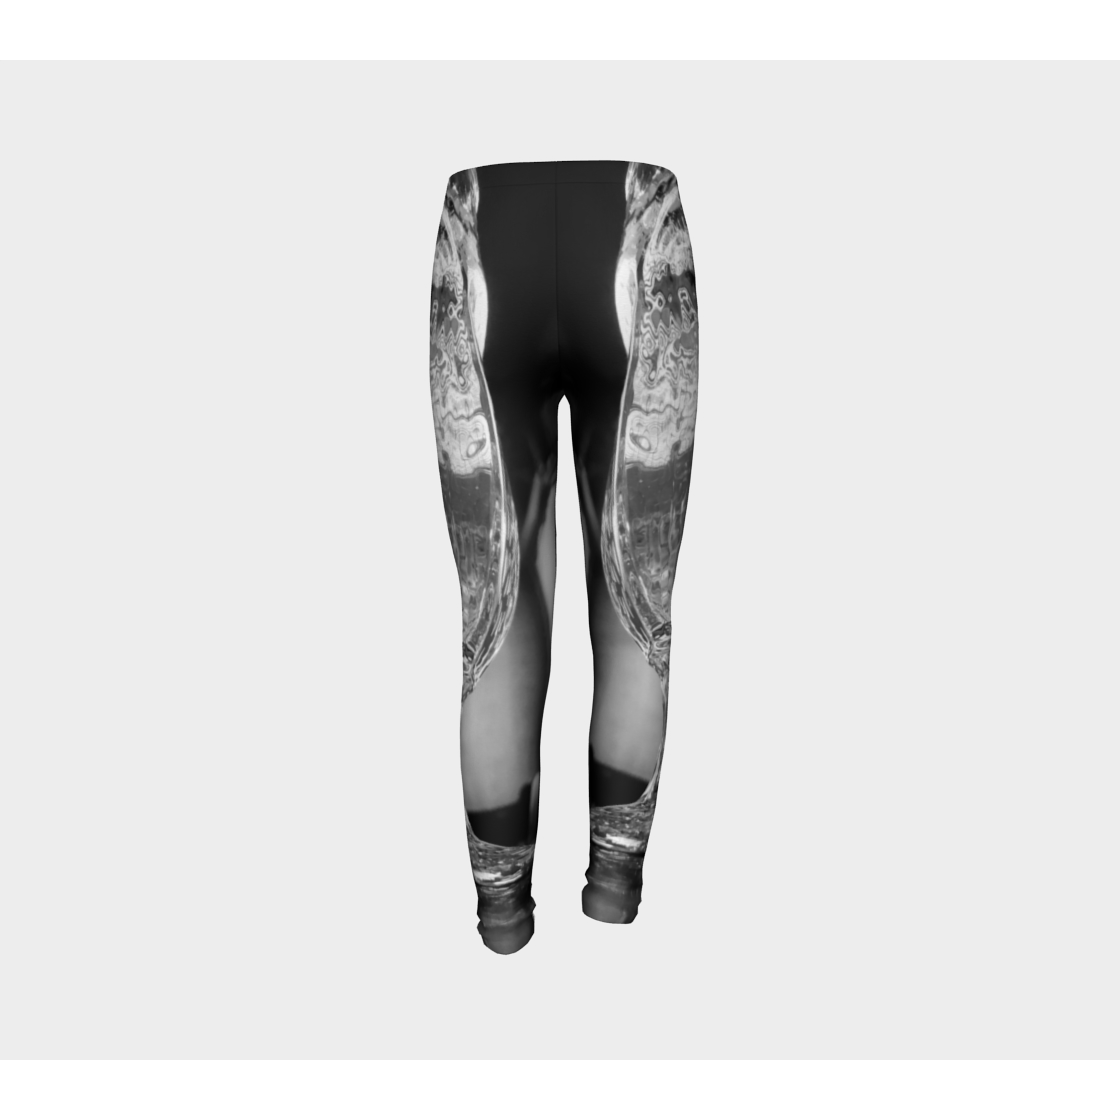 Youth Leggings for girls with: Water Glass Design, 6-7 back